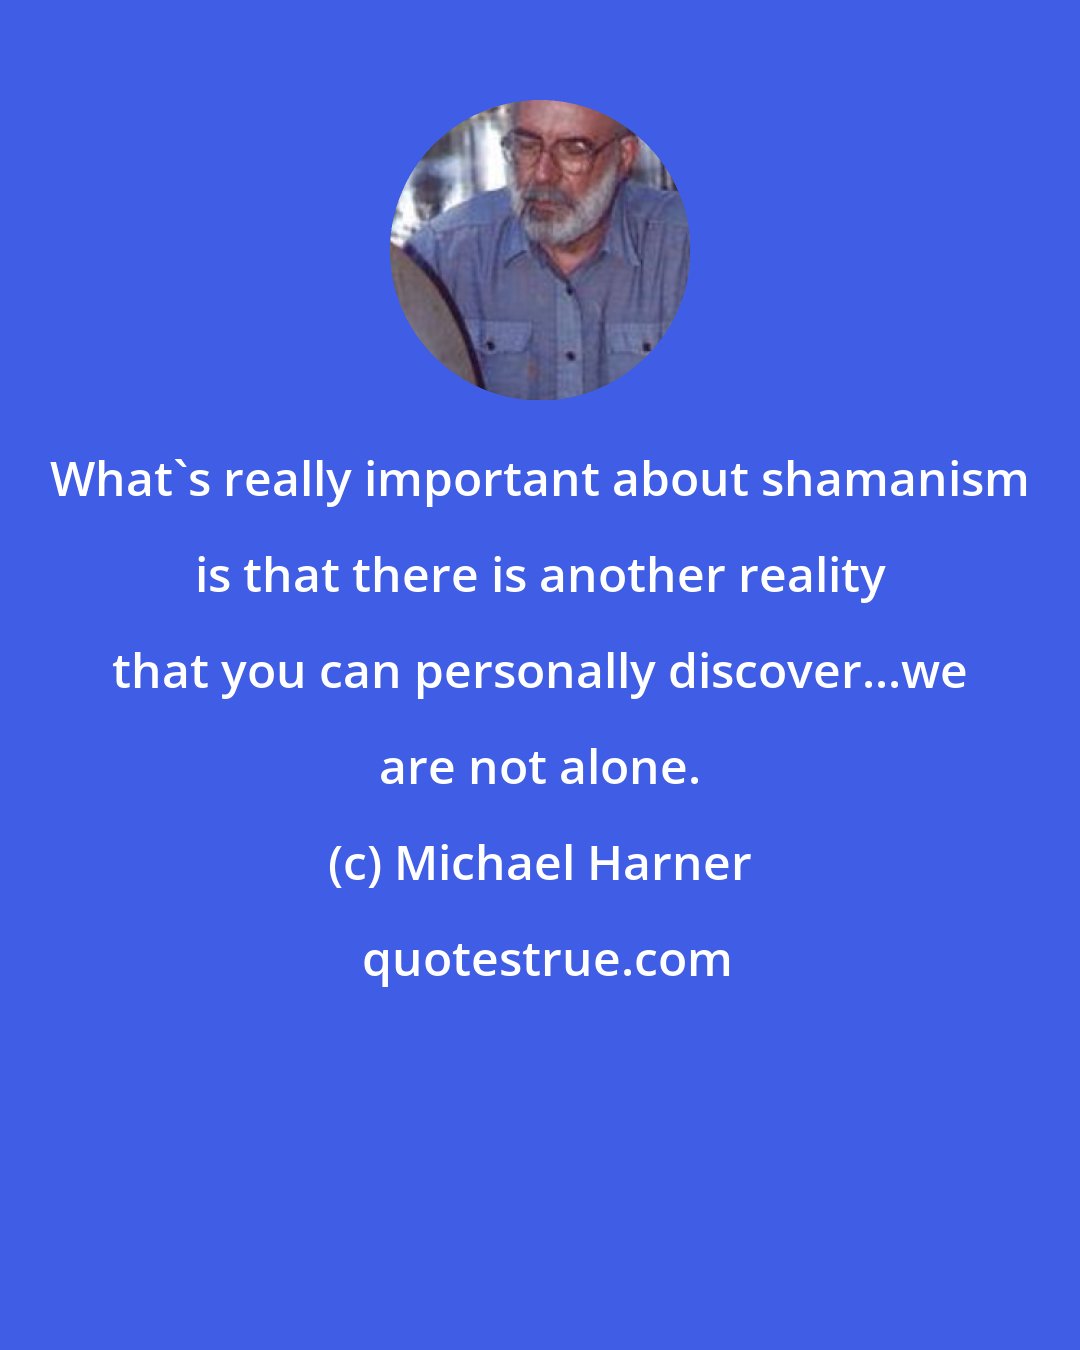 Michael Harner: What's really important about shamanism is that there is another reality that you can personally discover...we are not alone.